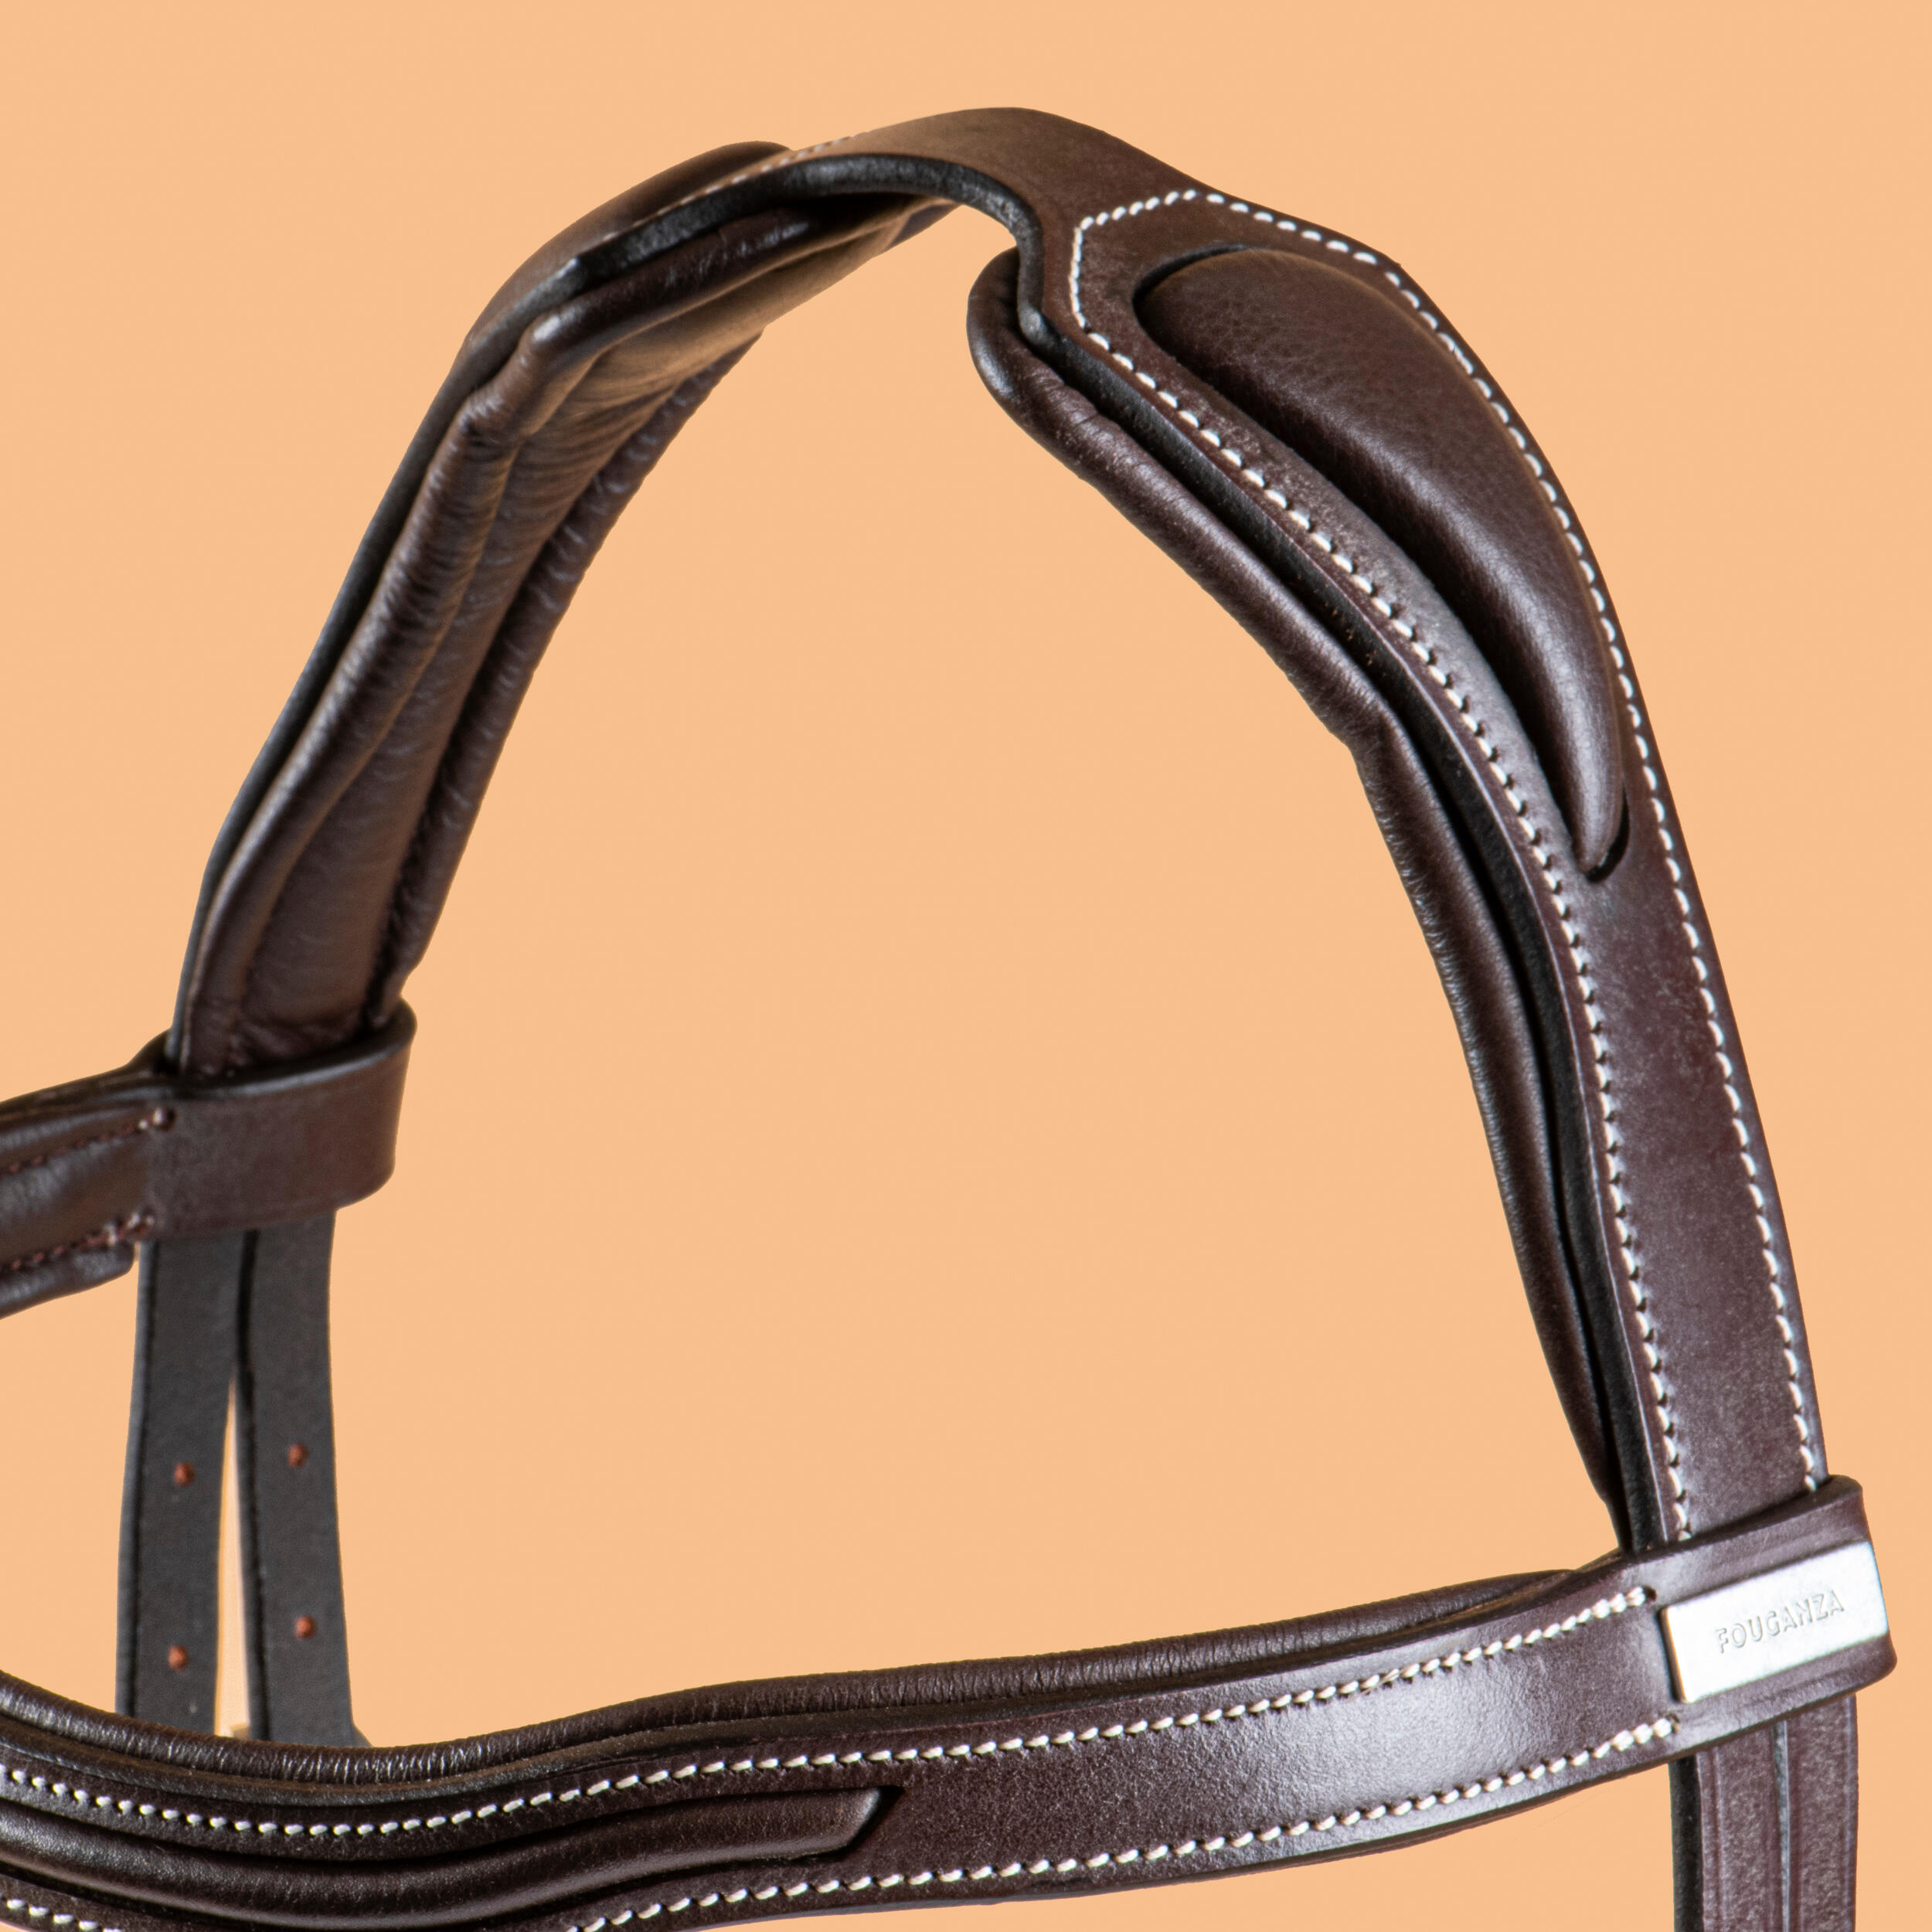 Horse & Pony Leather Bridle With French Noseband 900 - Dark Brown/Black 3/5